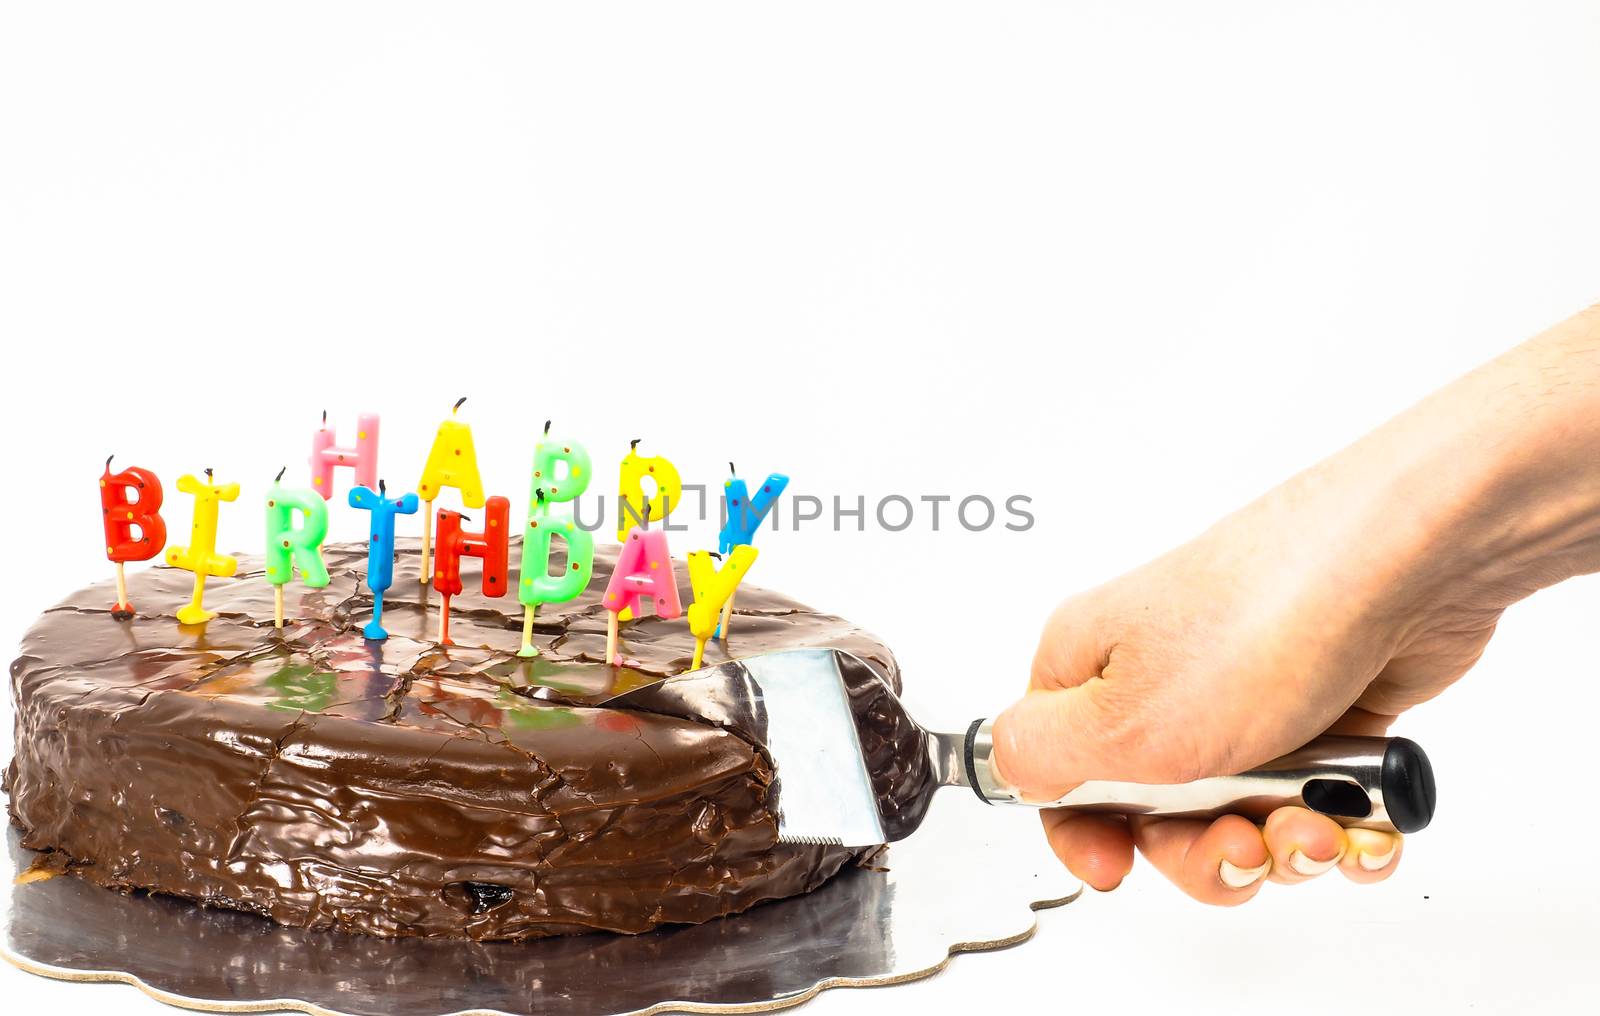 Female person cutting a homemade sacher chocolate cake with birthday candles